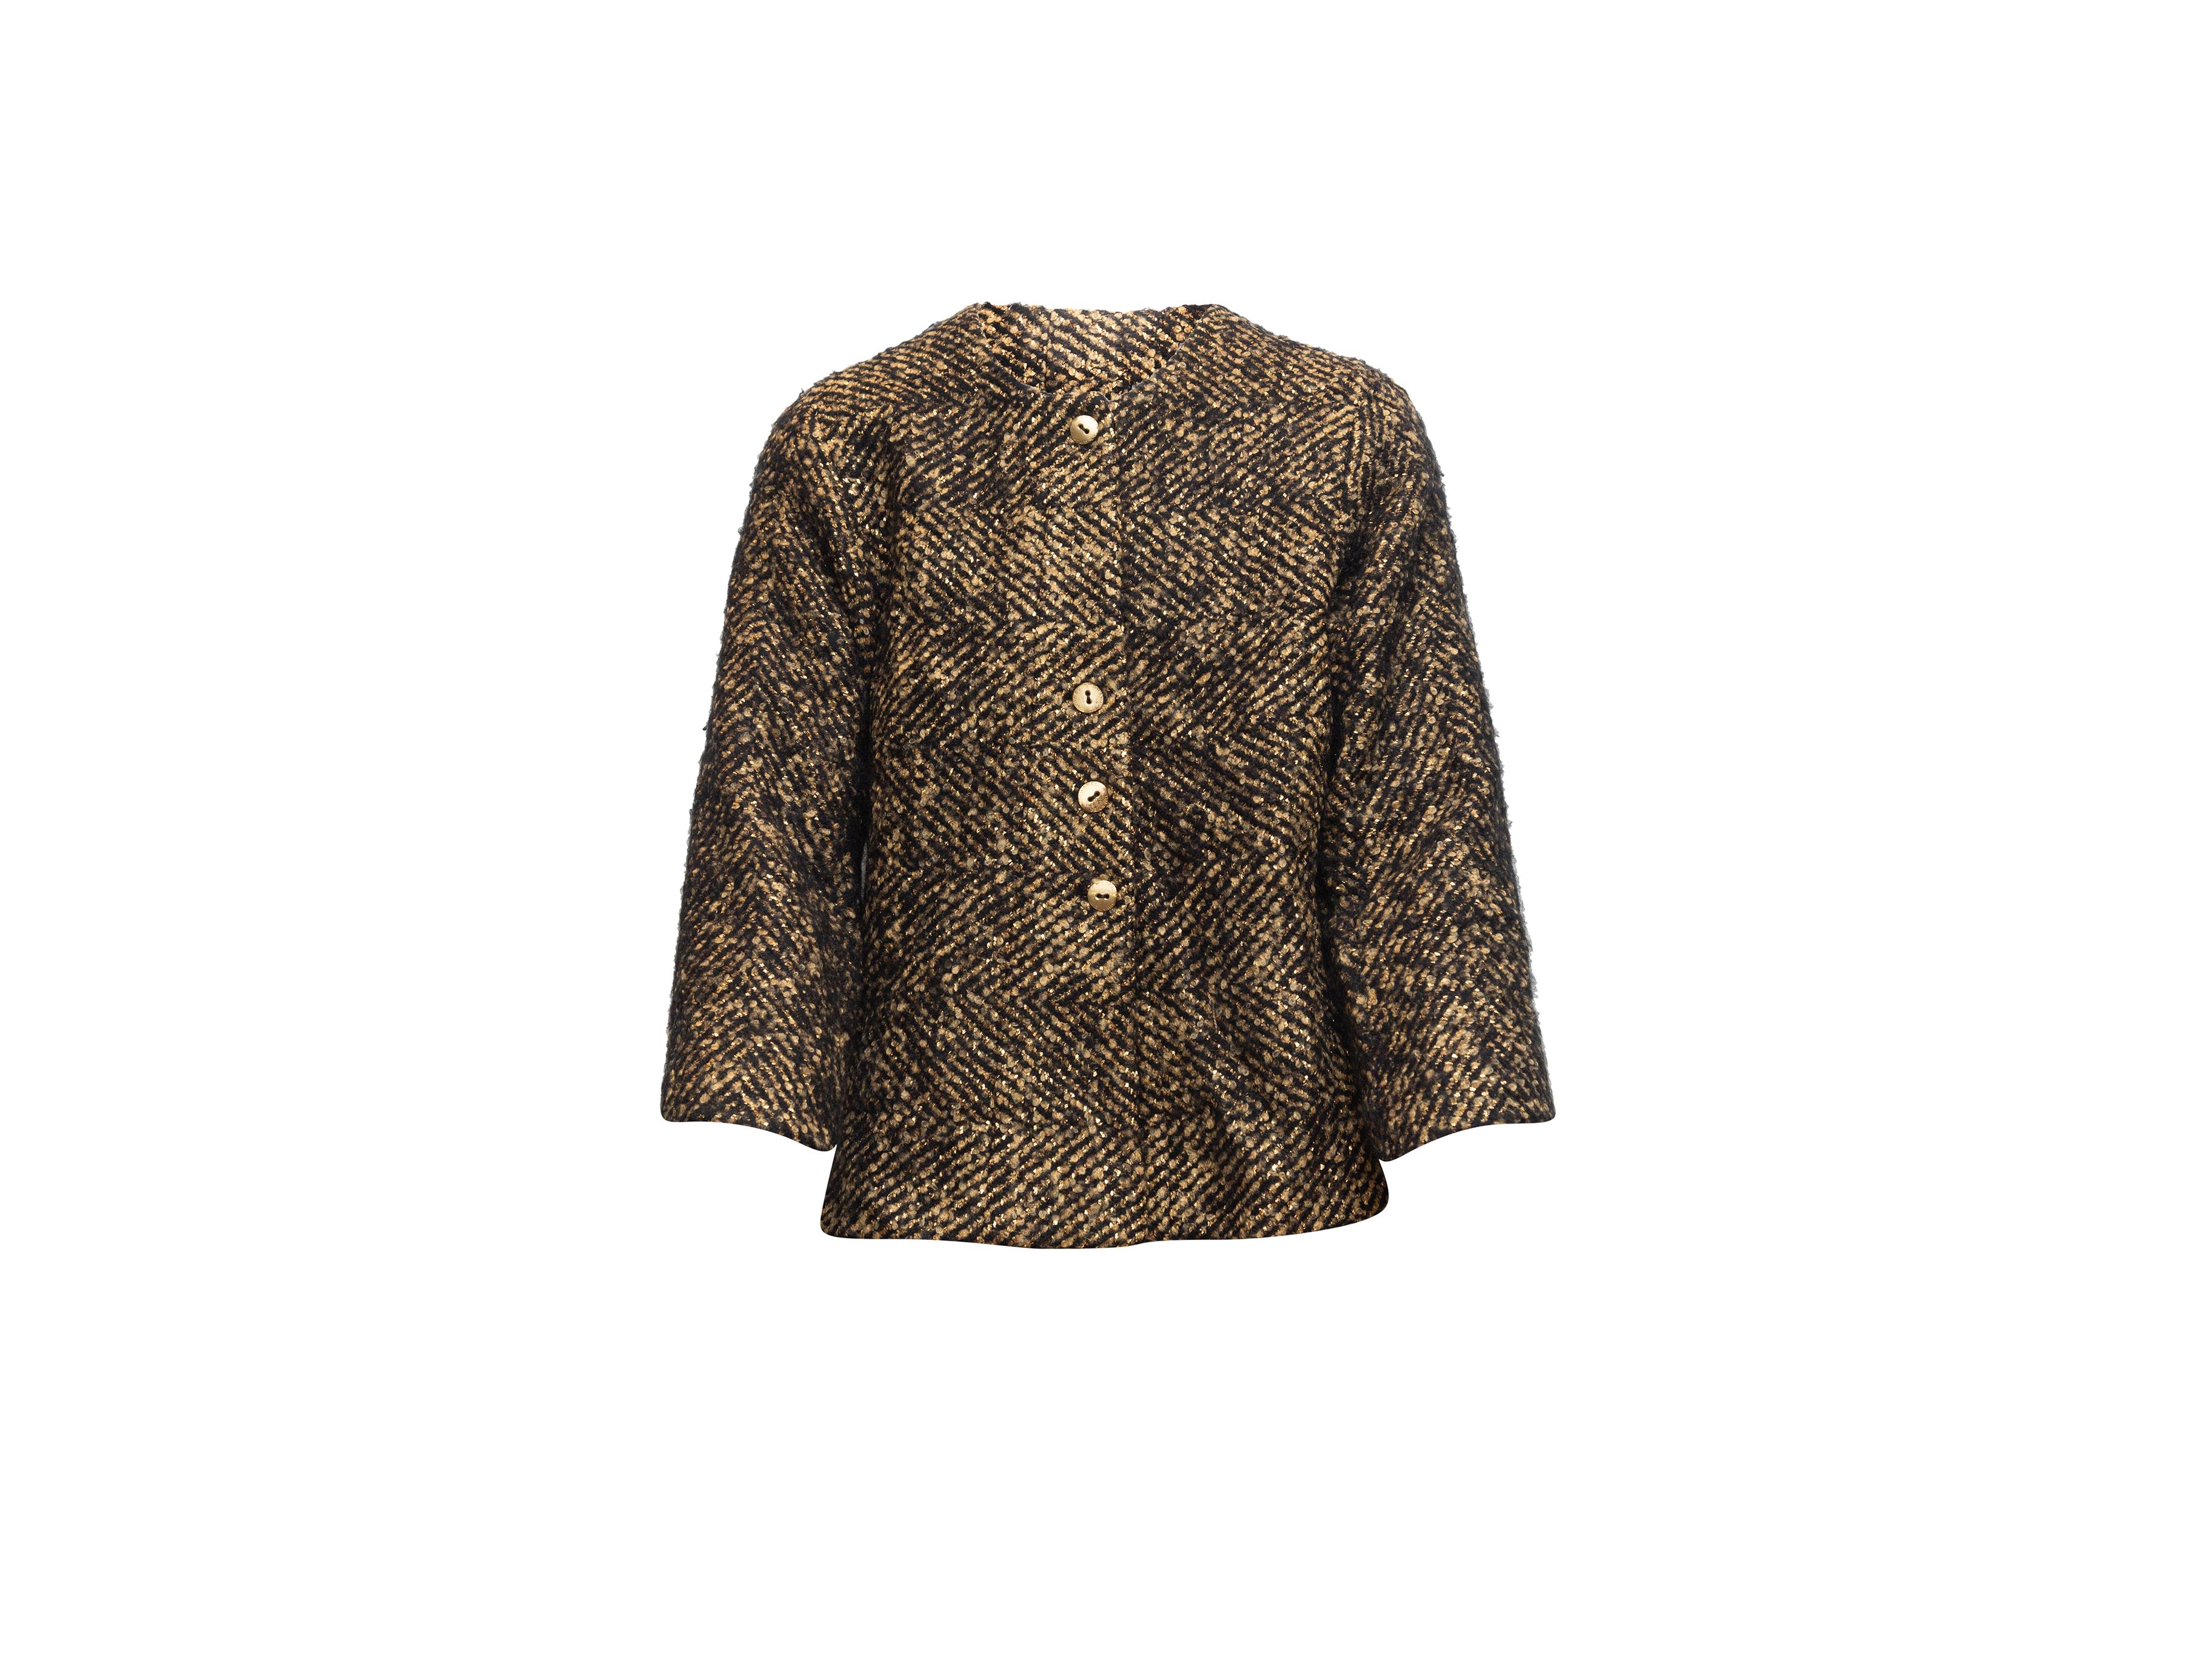 Product details: Black and gold wool tweed jacket by Chanel. Crew neck. Gold-tone button closures at center front. Designer size 44. 34